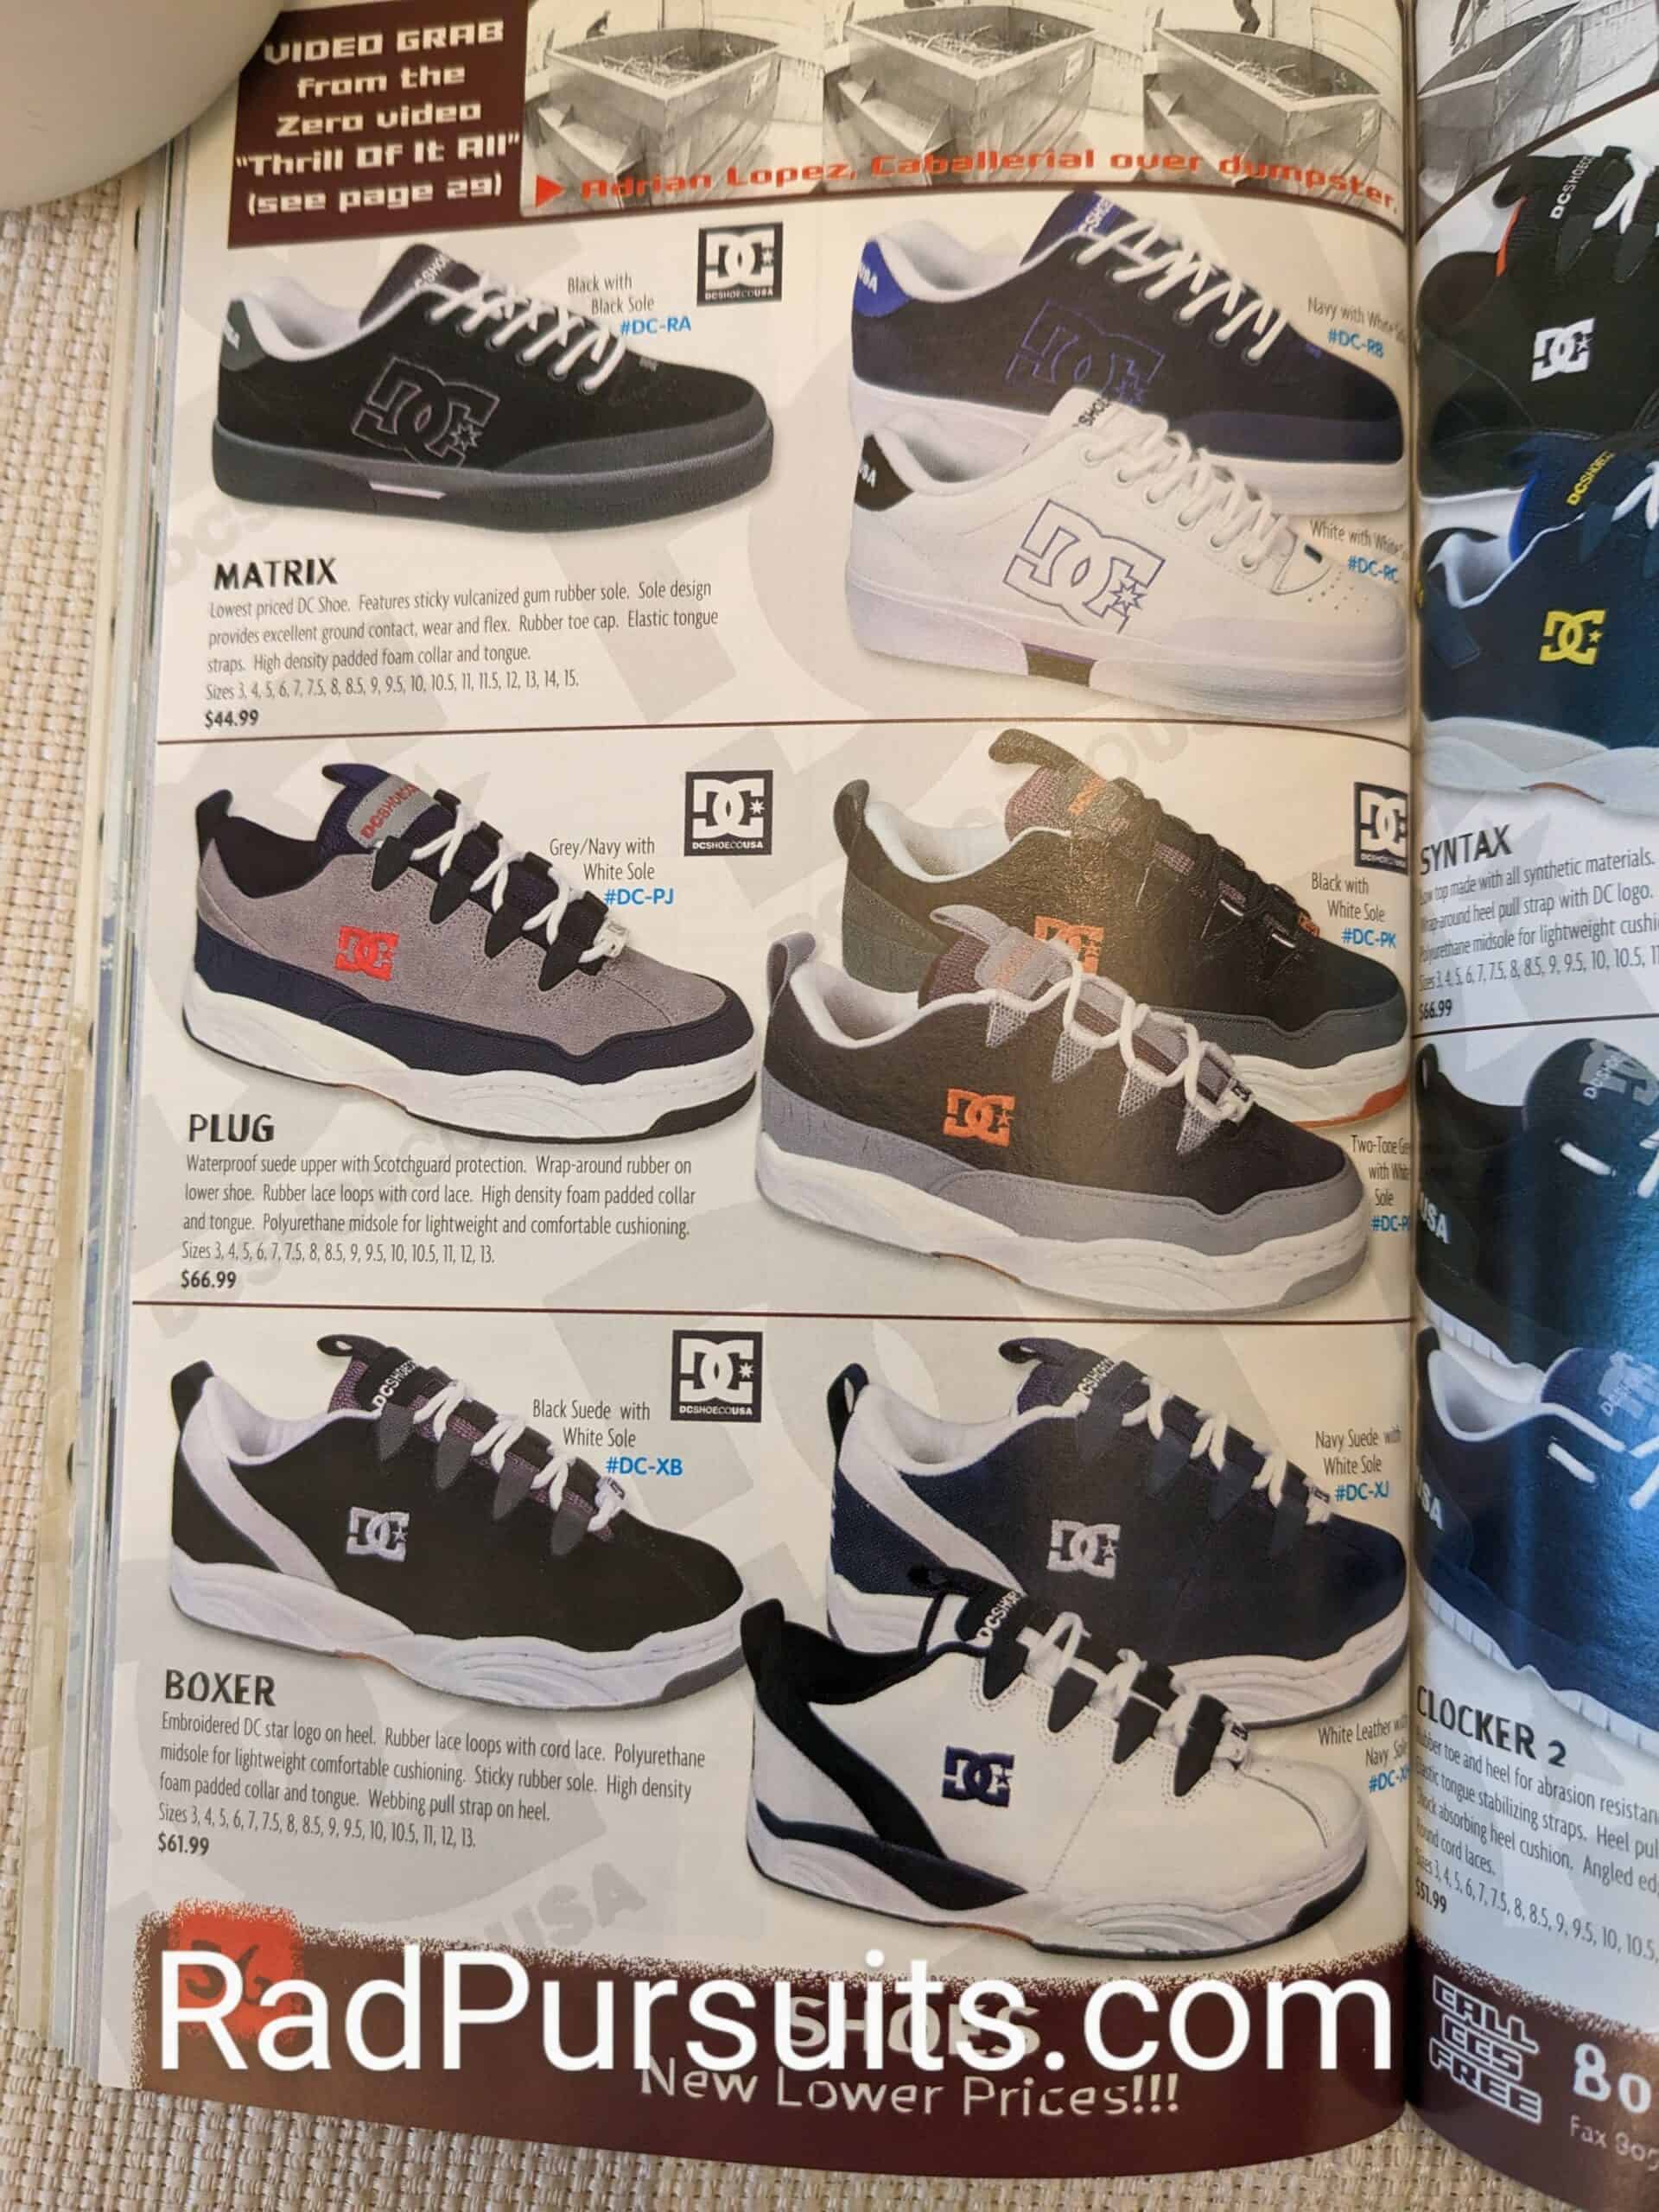 CCS Winter 97 Shoes Page 56 with DC Shoes